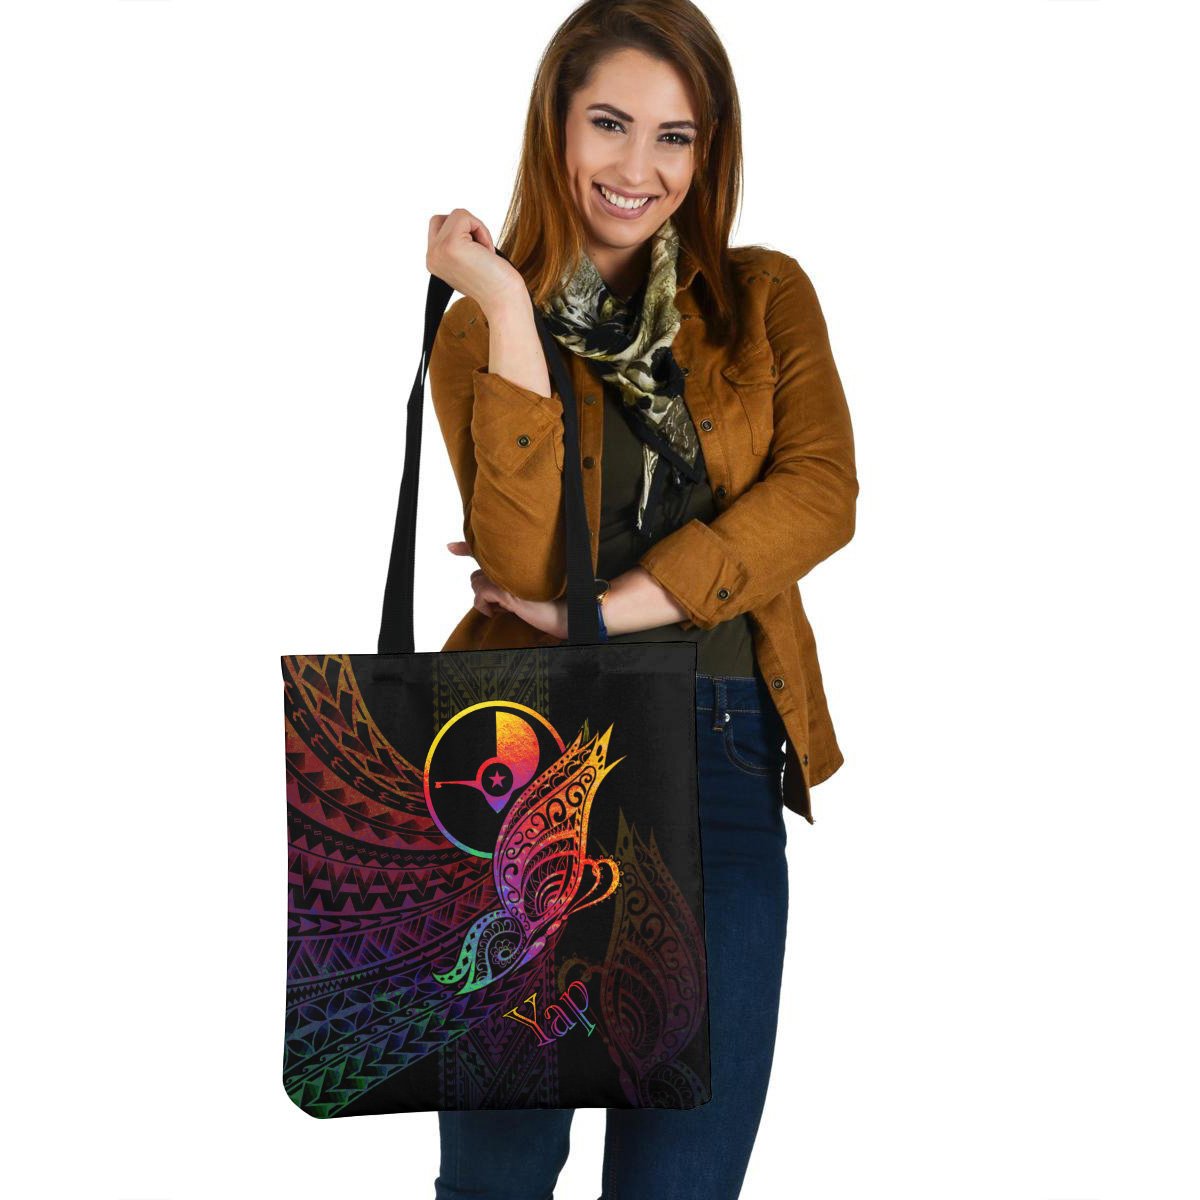 Yap State Tote Bag - Butterfly Polynesian Style Tote Bag One Size Black - Polynesian Pride